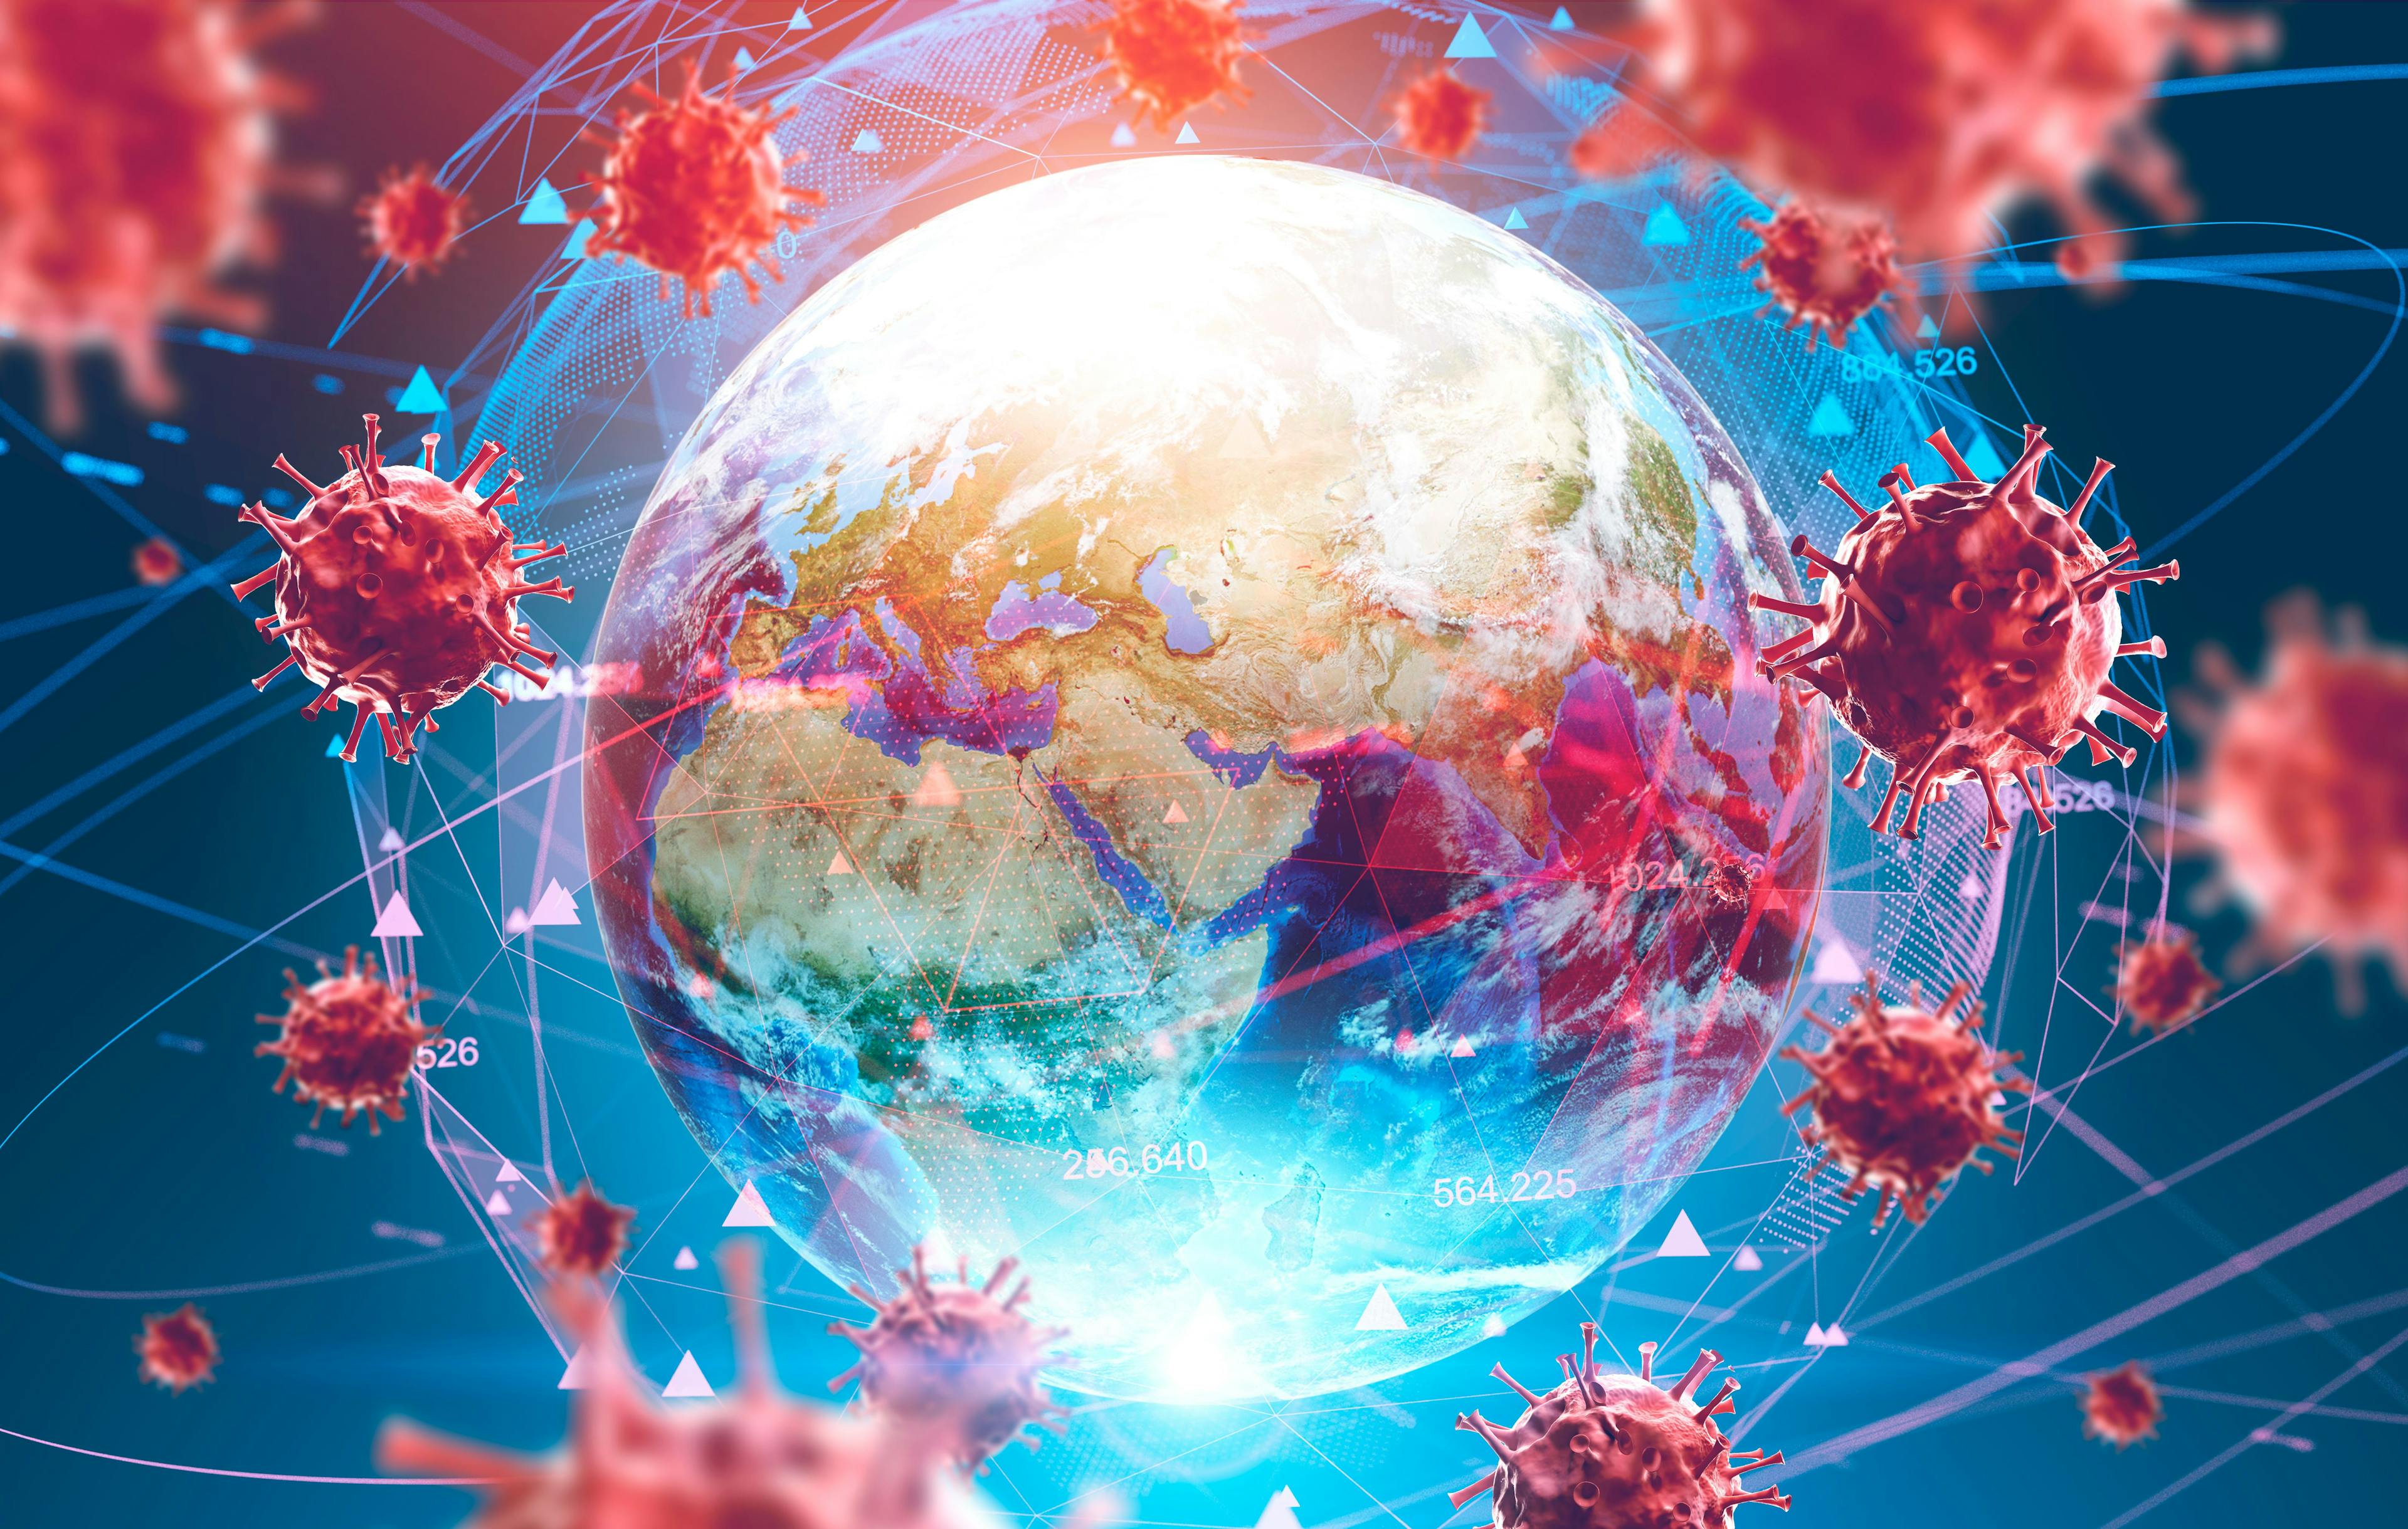 Tech, mRNA Among Key Trends in Health Care as the Pandemic Eases